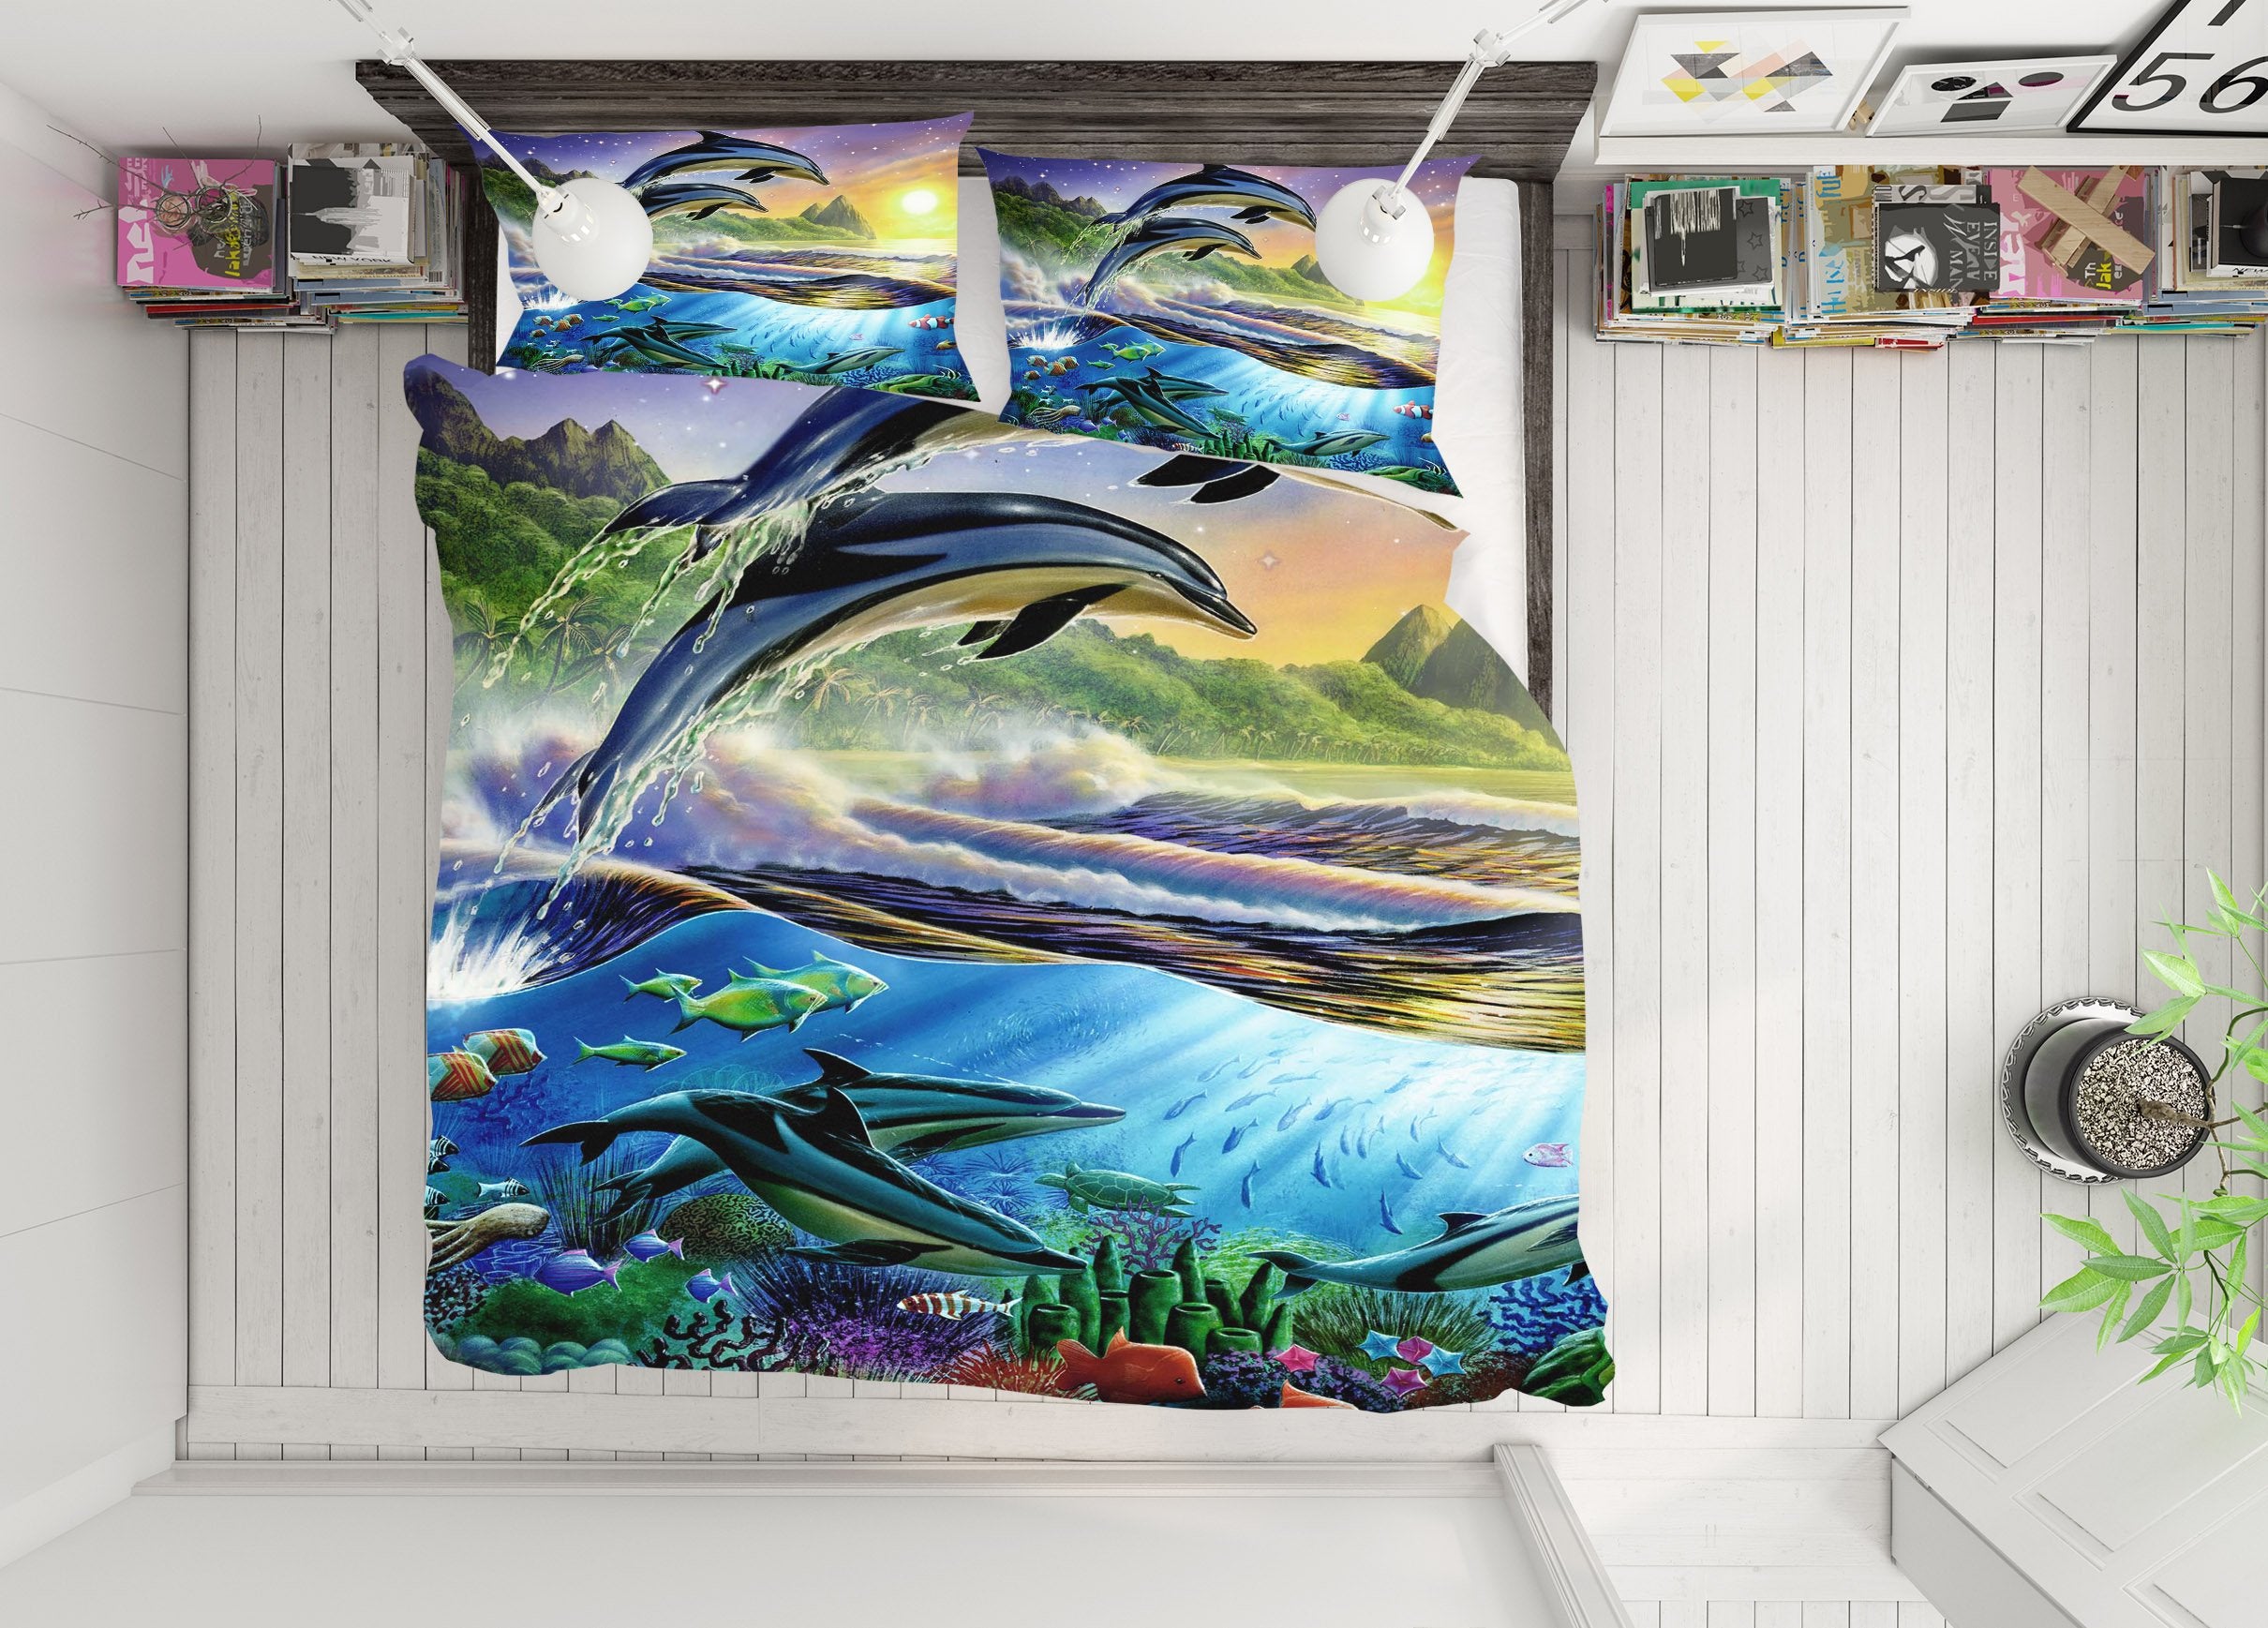 3D Atlantic Dolphins 2018 Adrian Chesterman Bedding Bed Pillowcases Quilt Quiet Covers AJ Creativity Home 